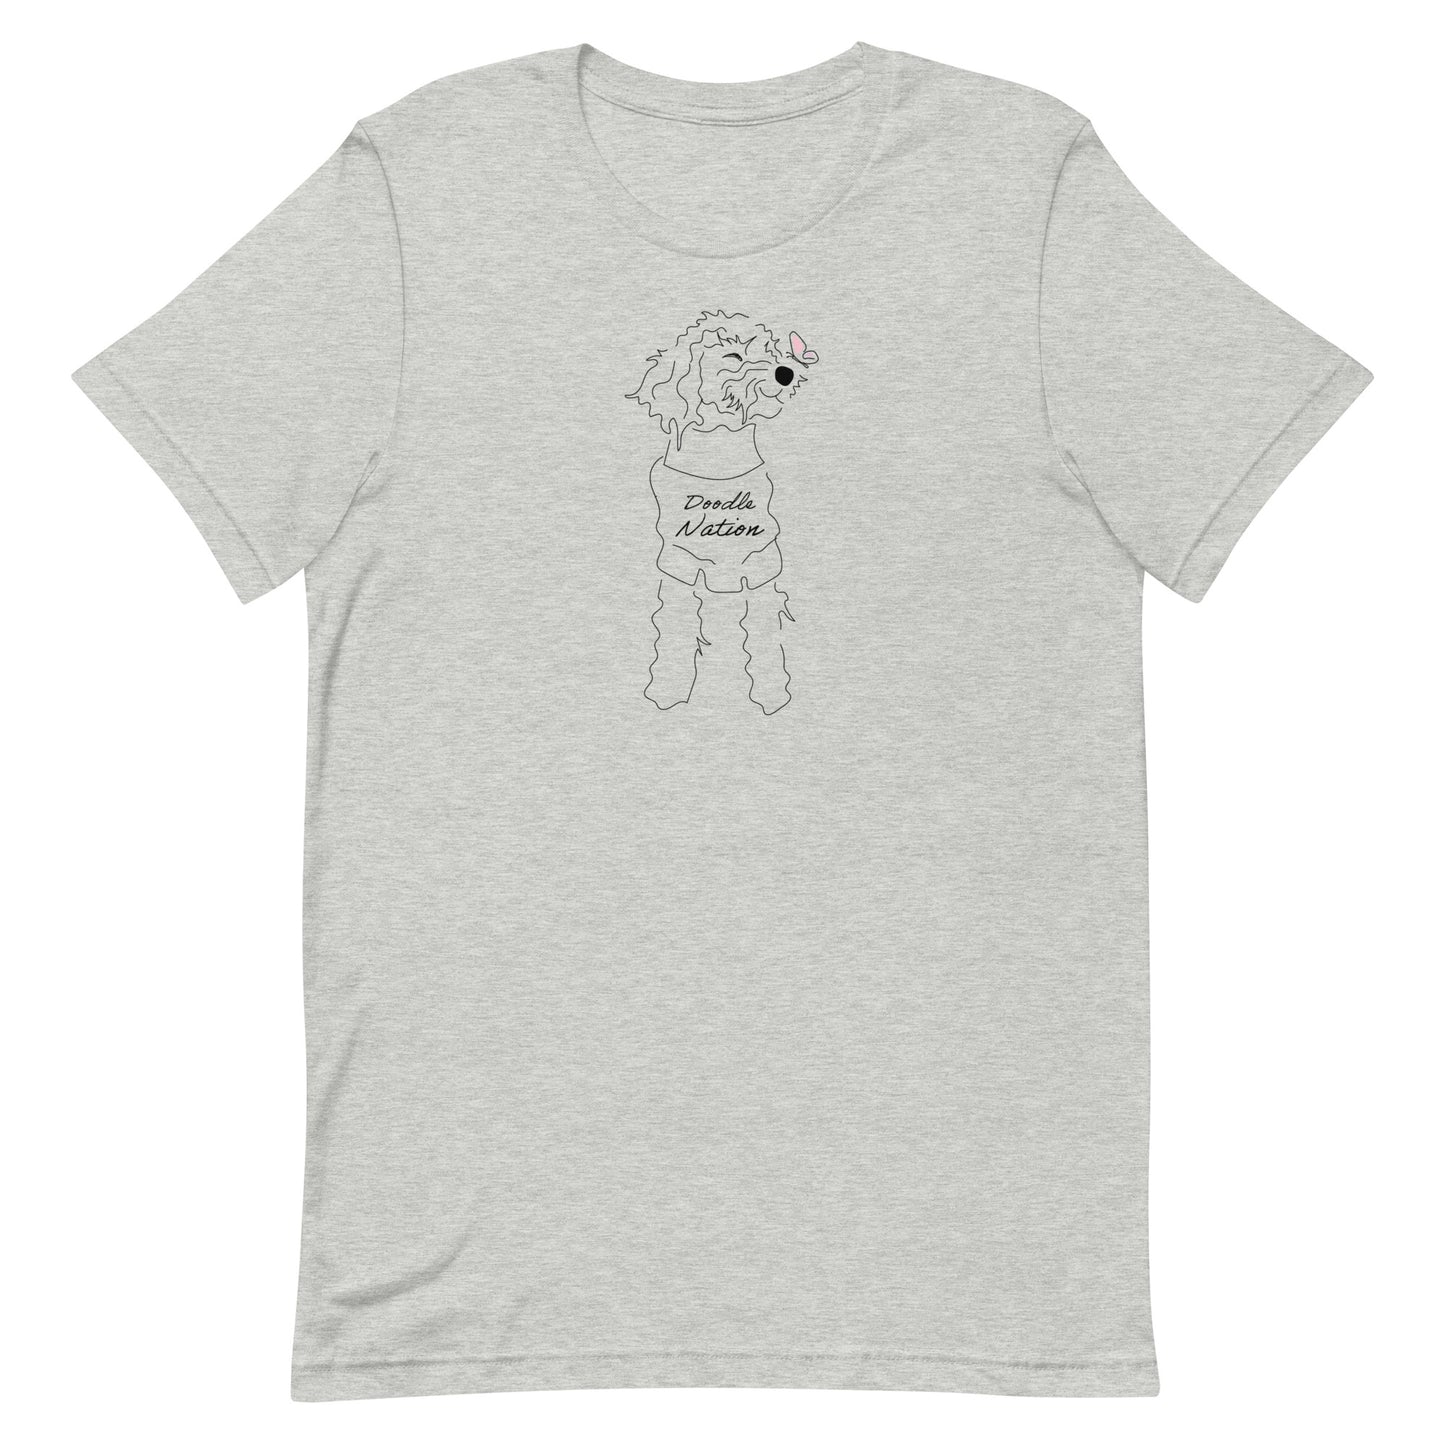 Goldendoodle t-shirt with Goldendoodle dog face and words "Doodle Nation" in athletic gray color